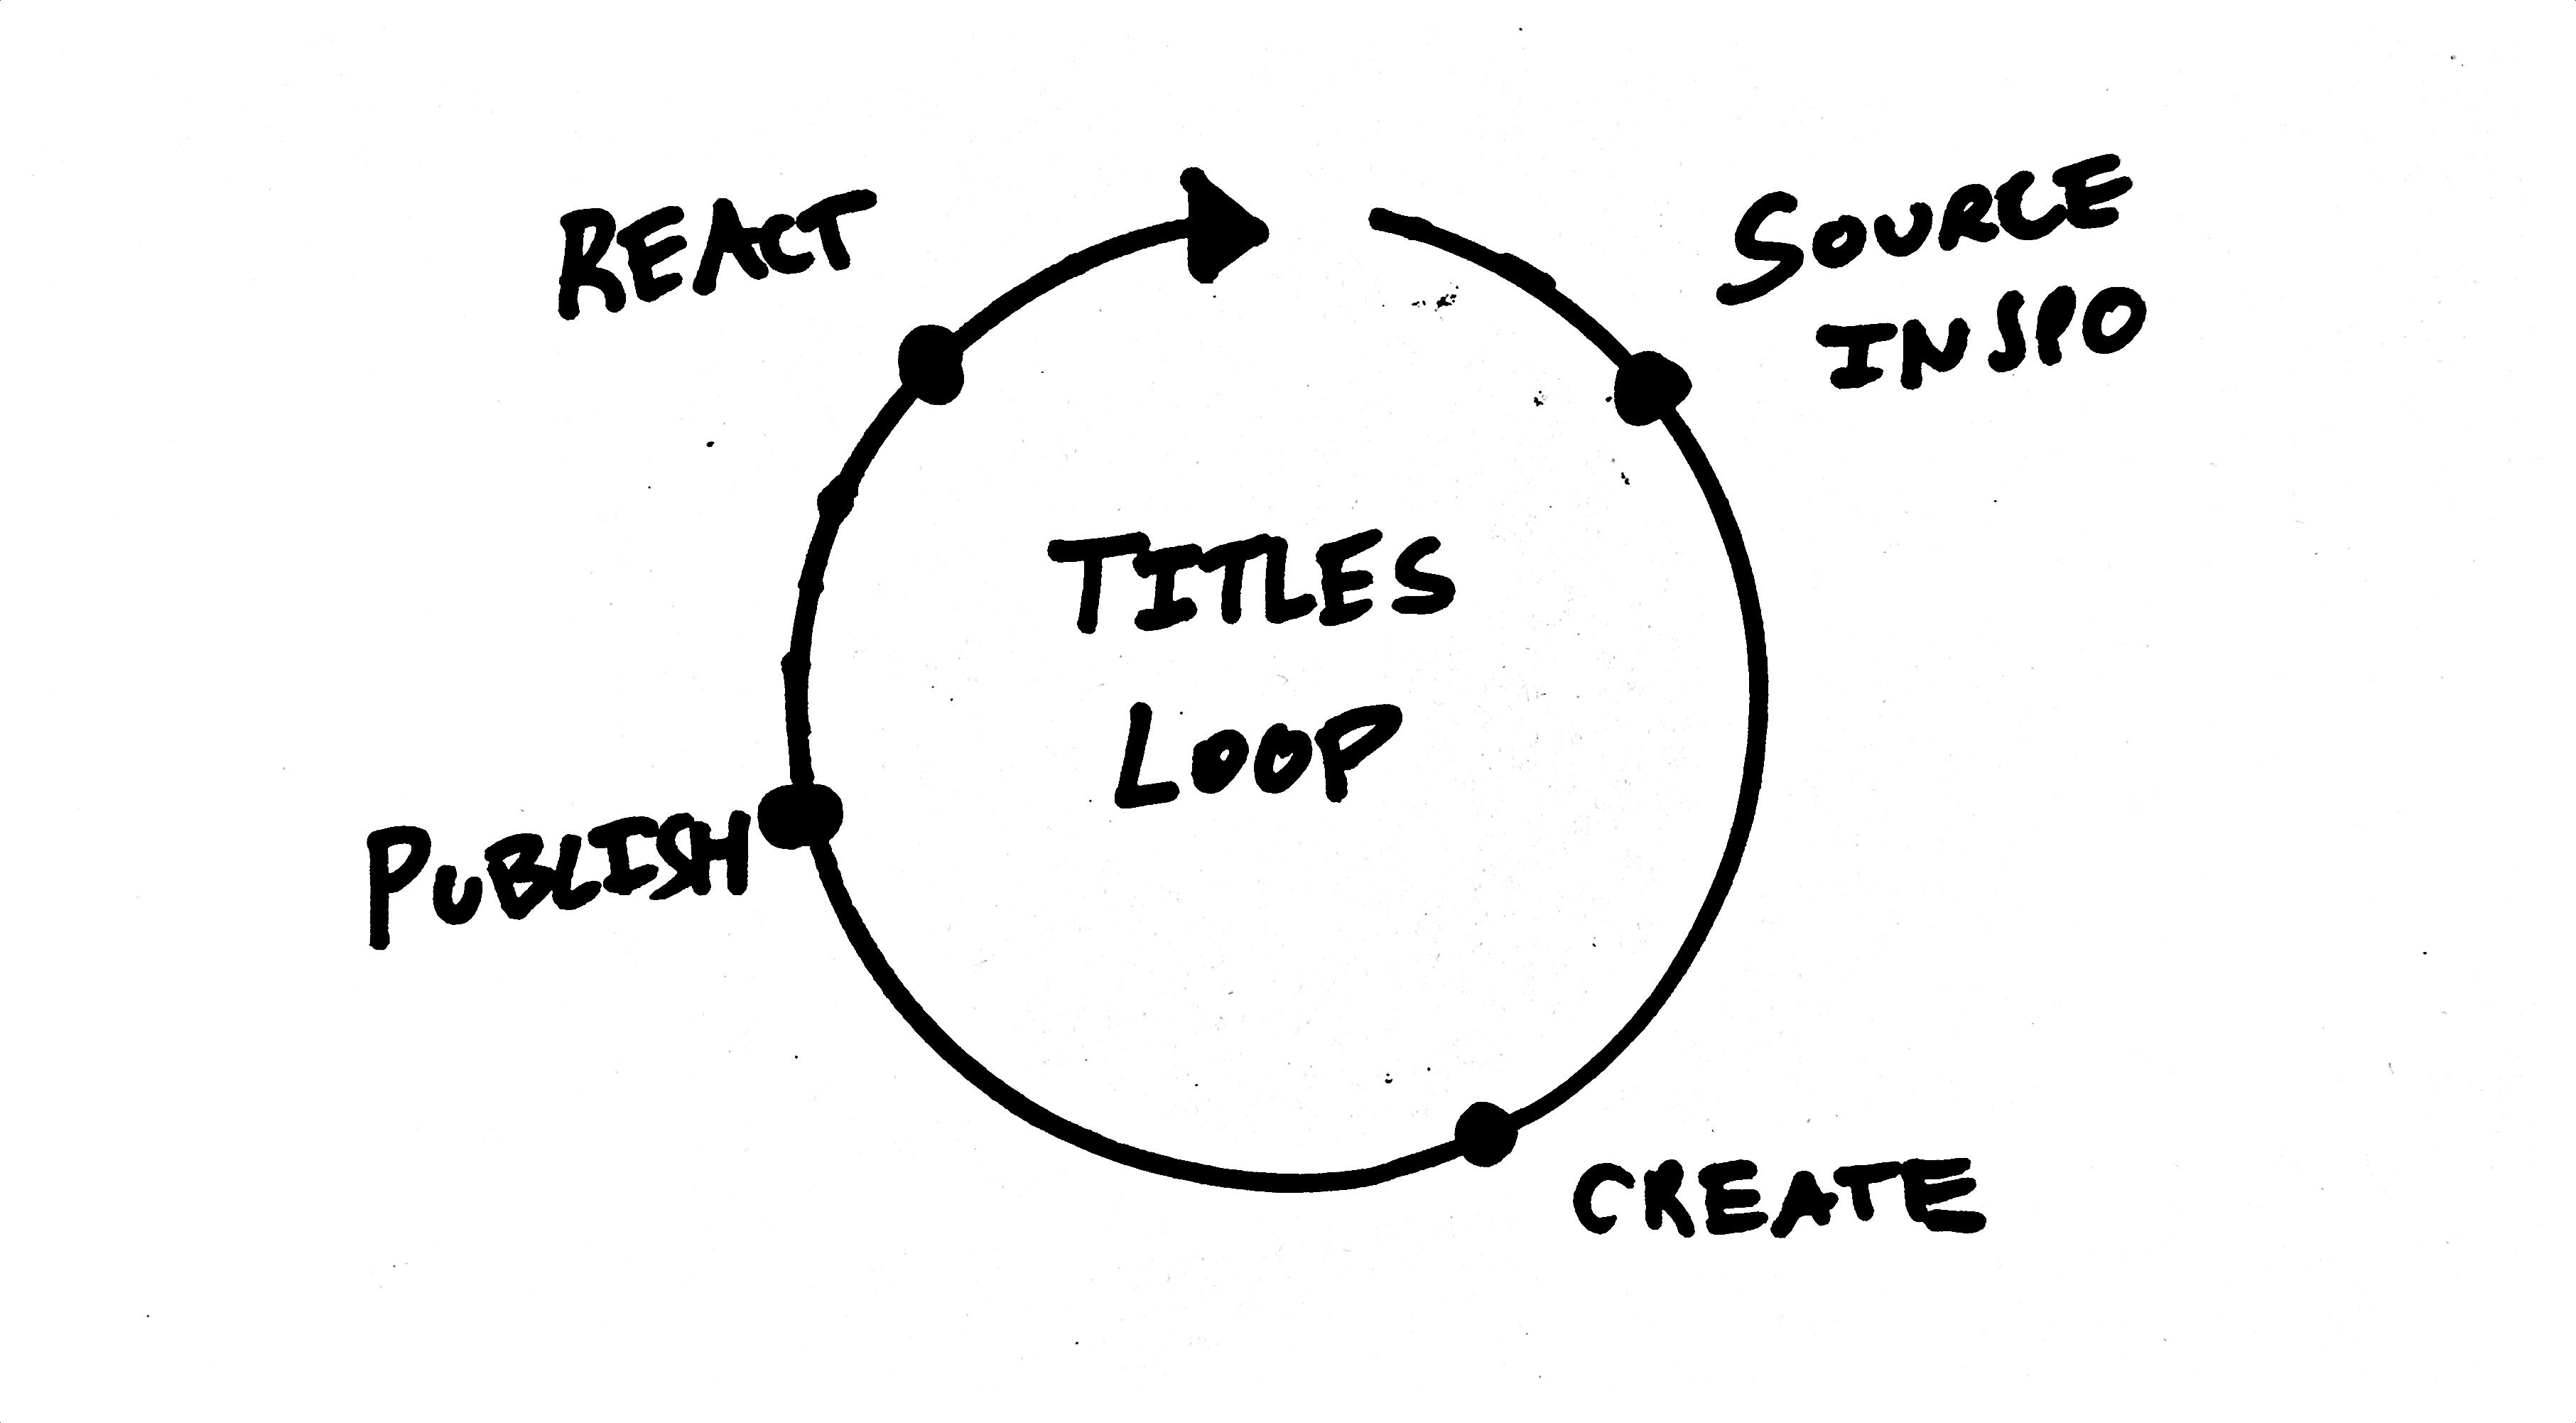 TITLES as the "creative process"